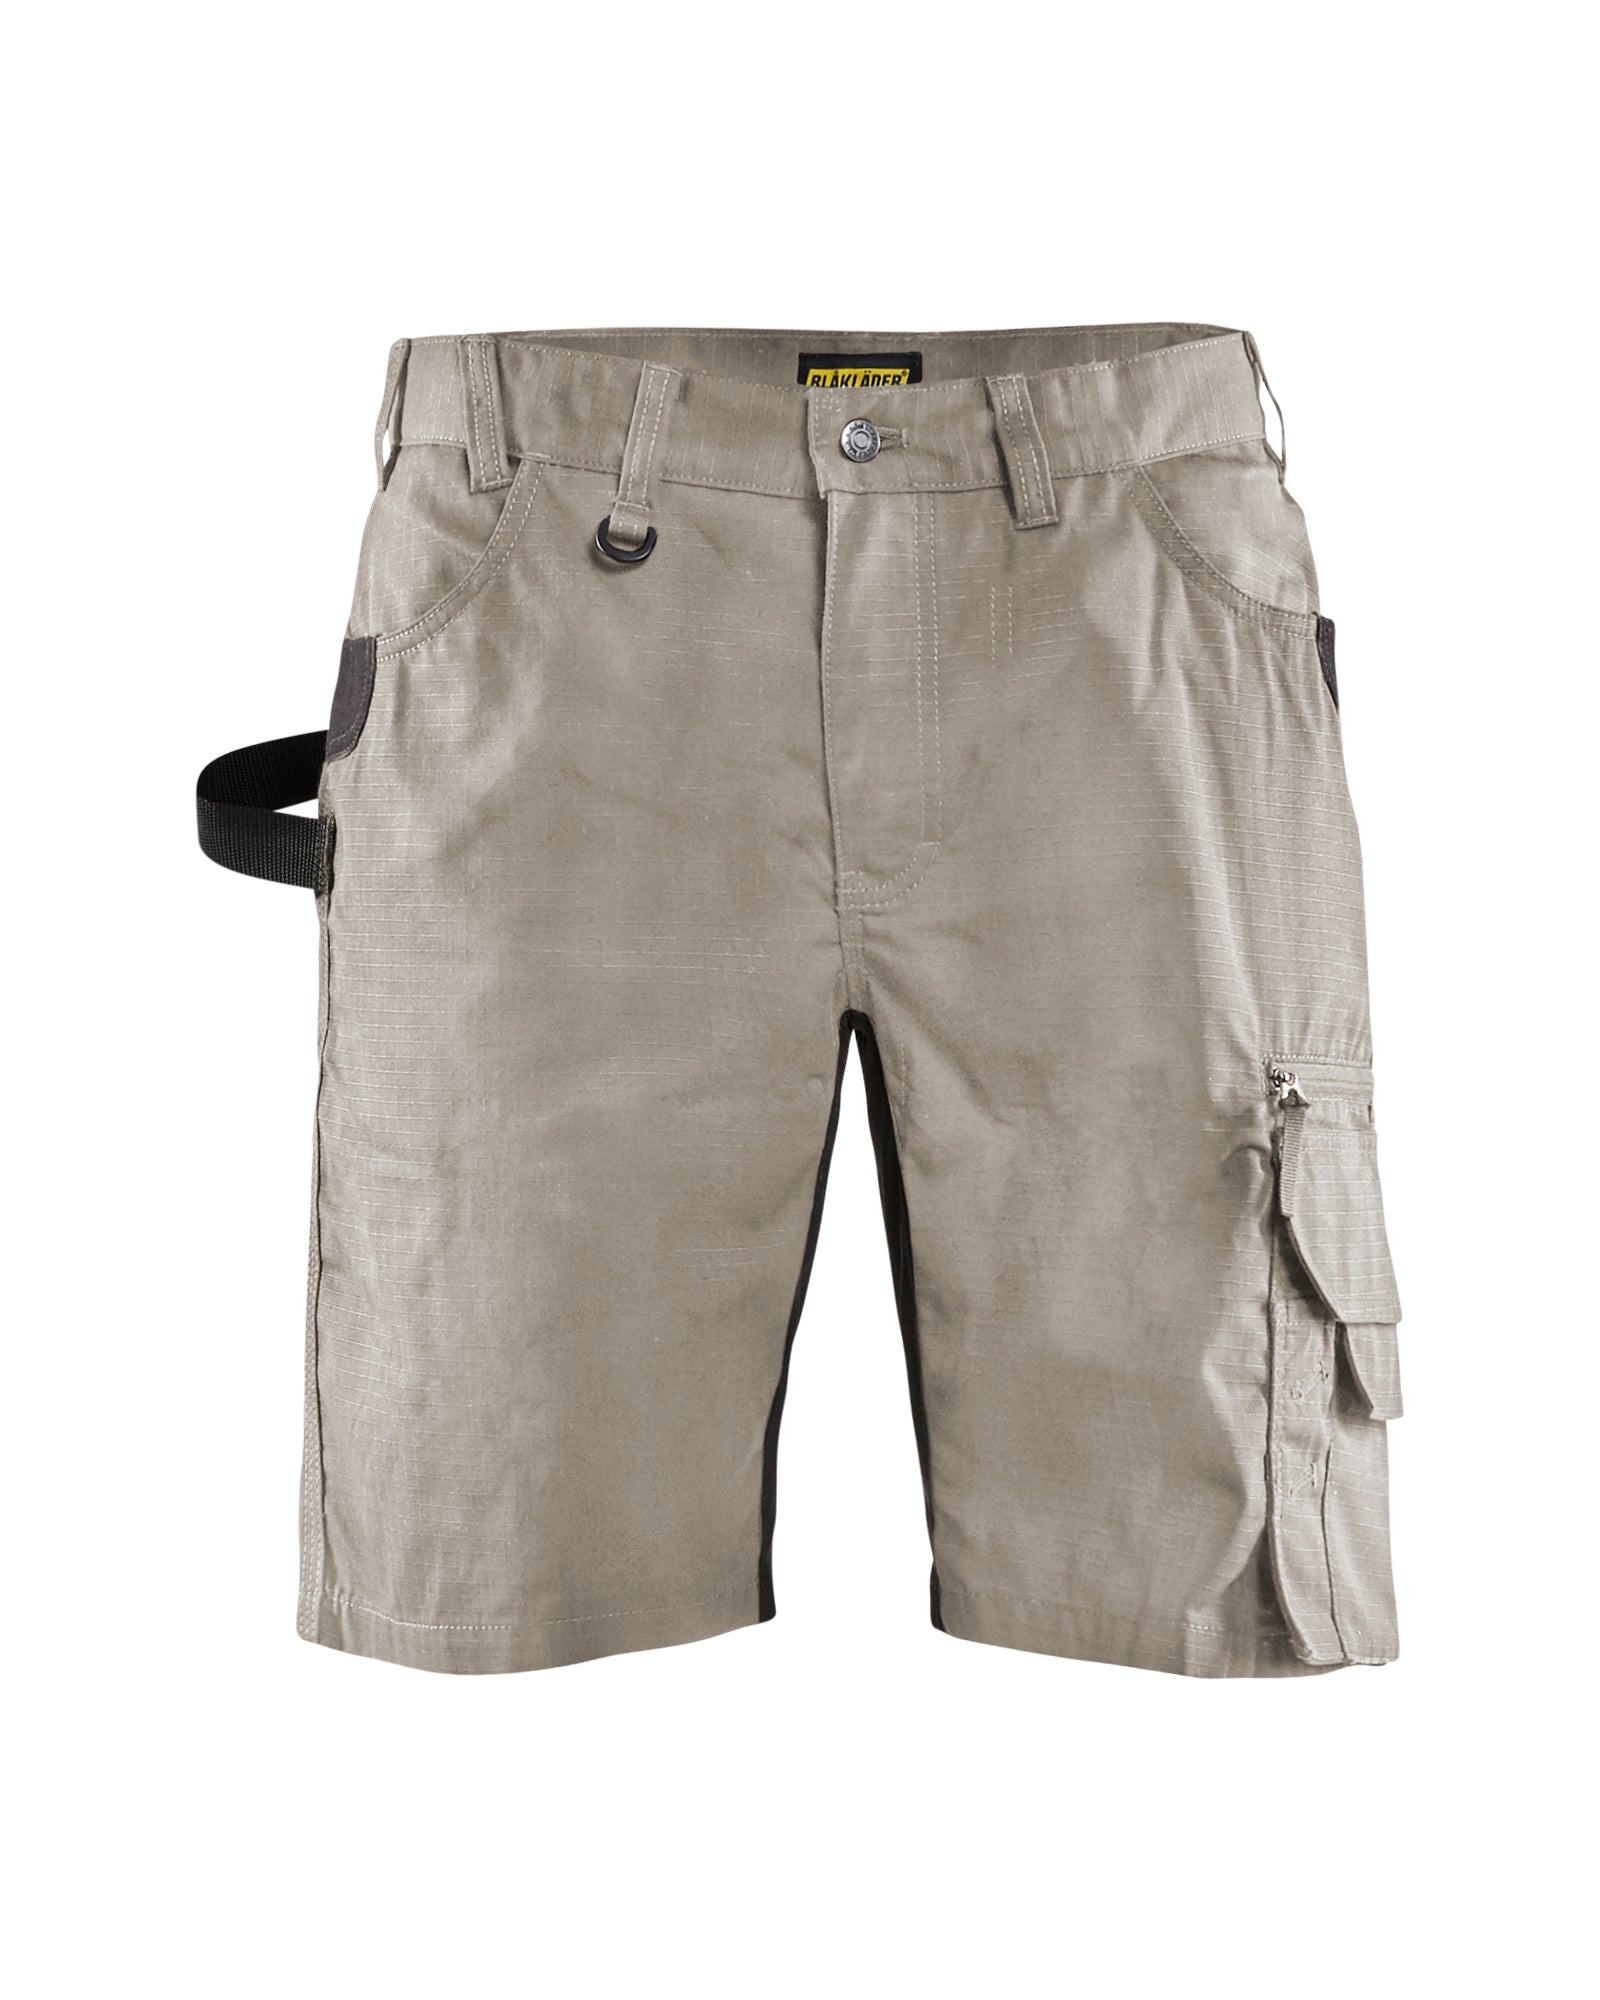 Men's Blaklader US Ripstop Short in Stone Craftsmen from the front view